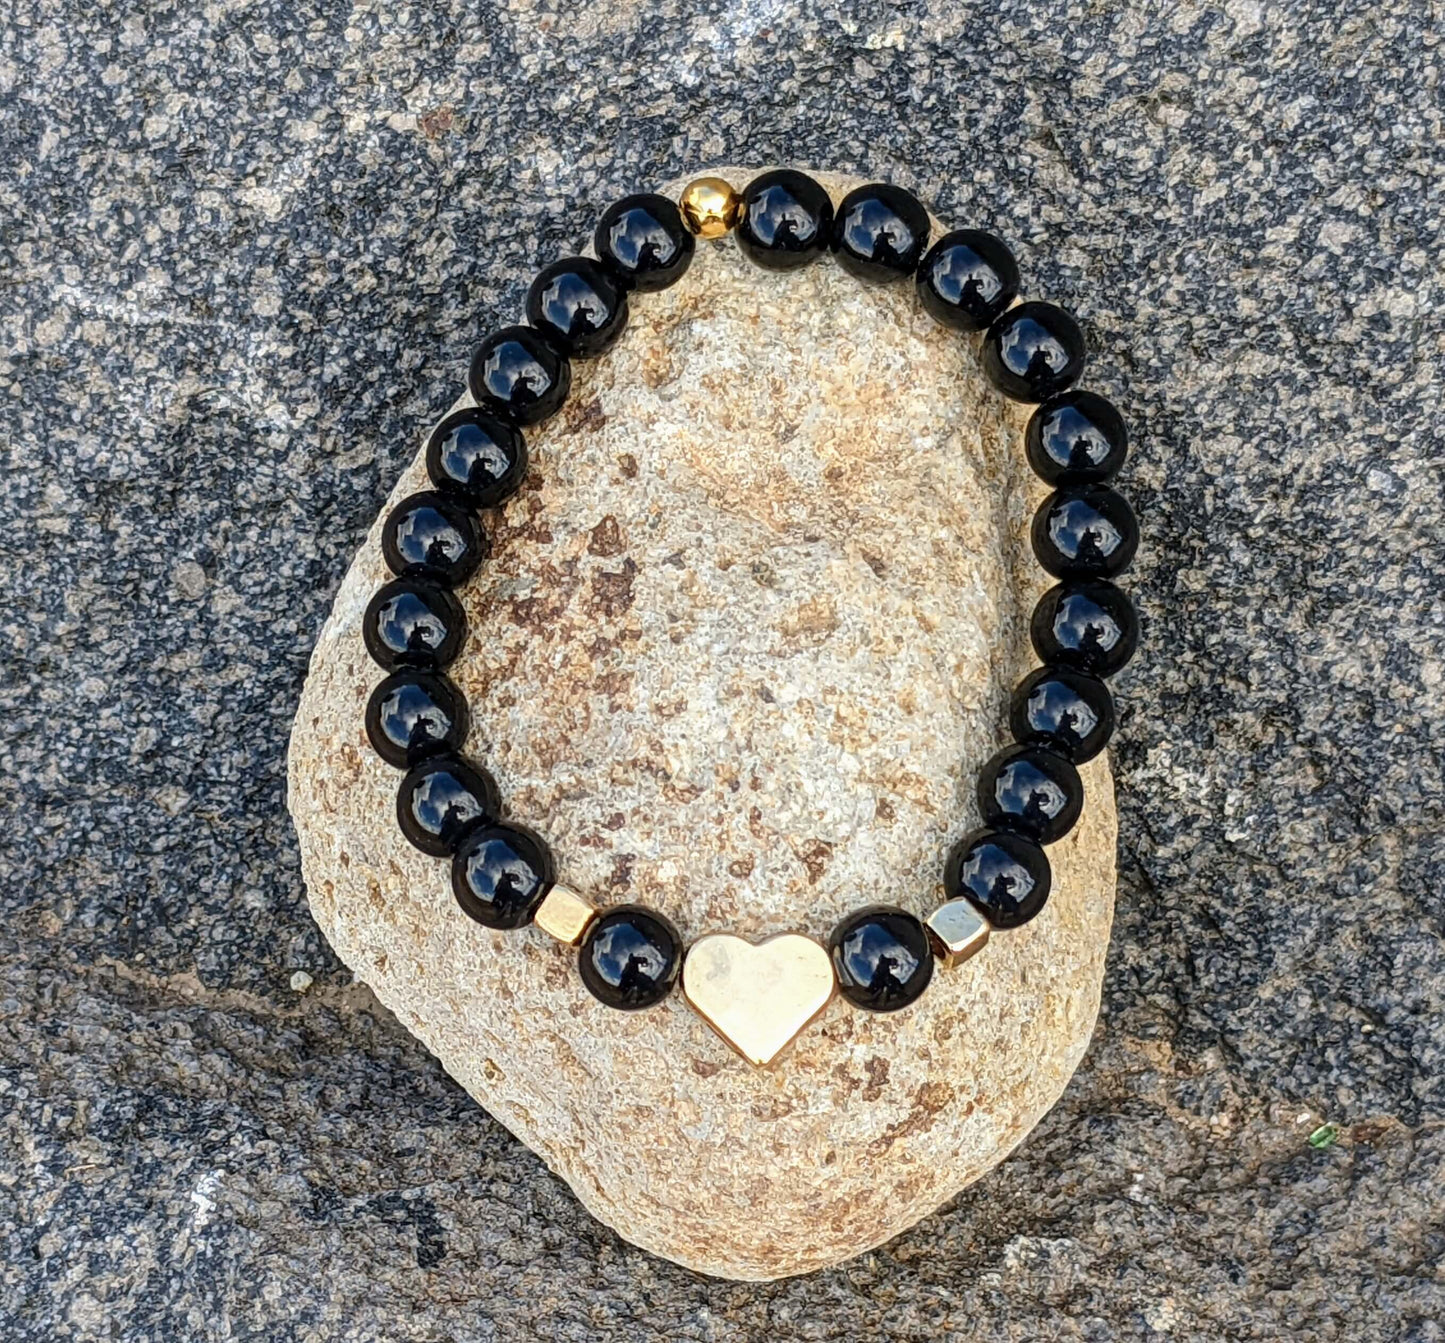 Black Onyx Polished (8mm Bead Size) with Golden Heart